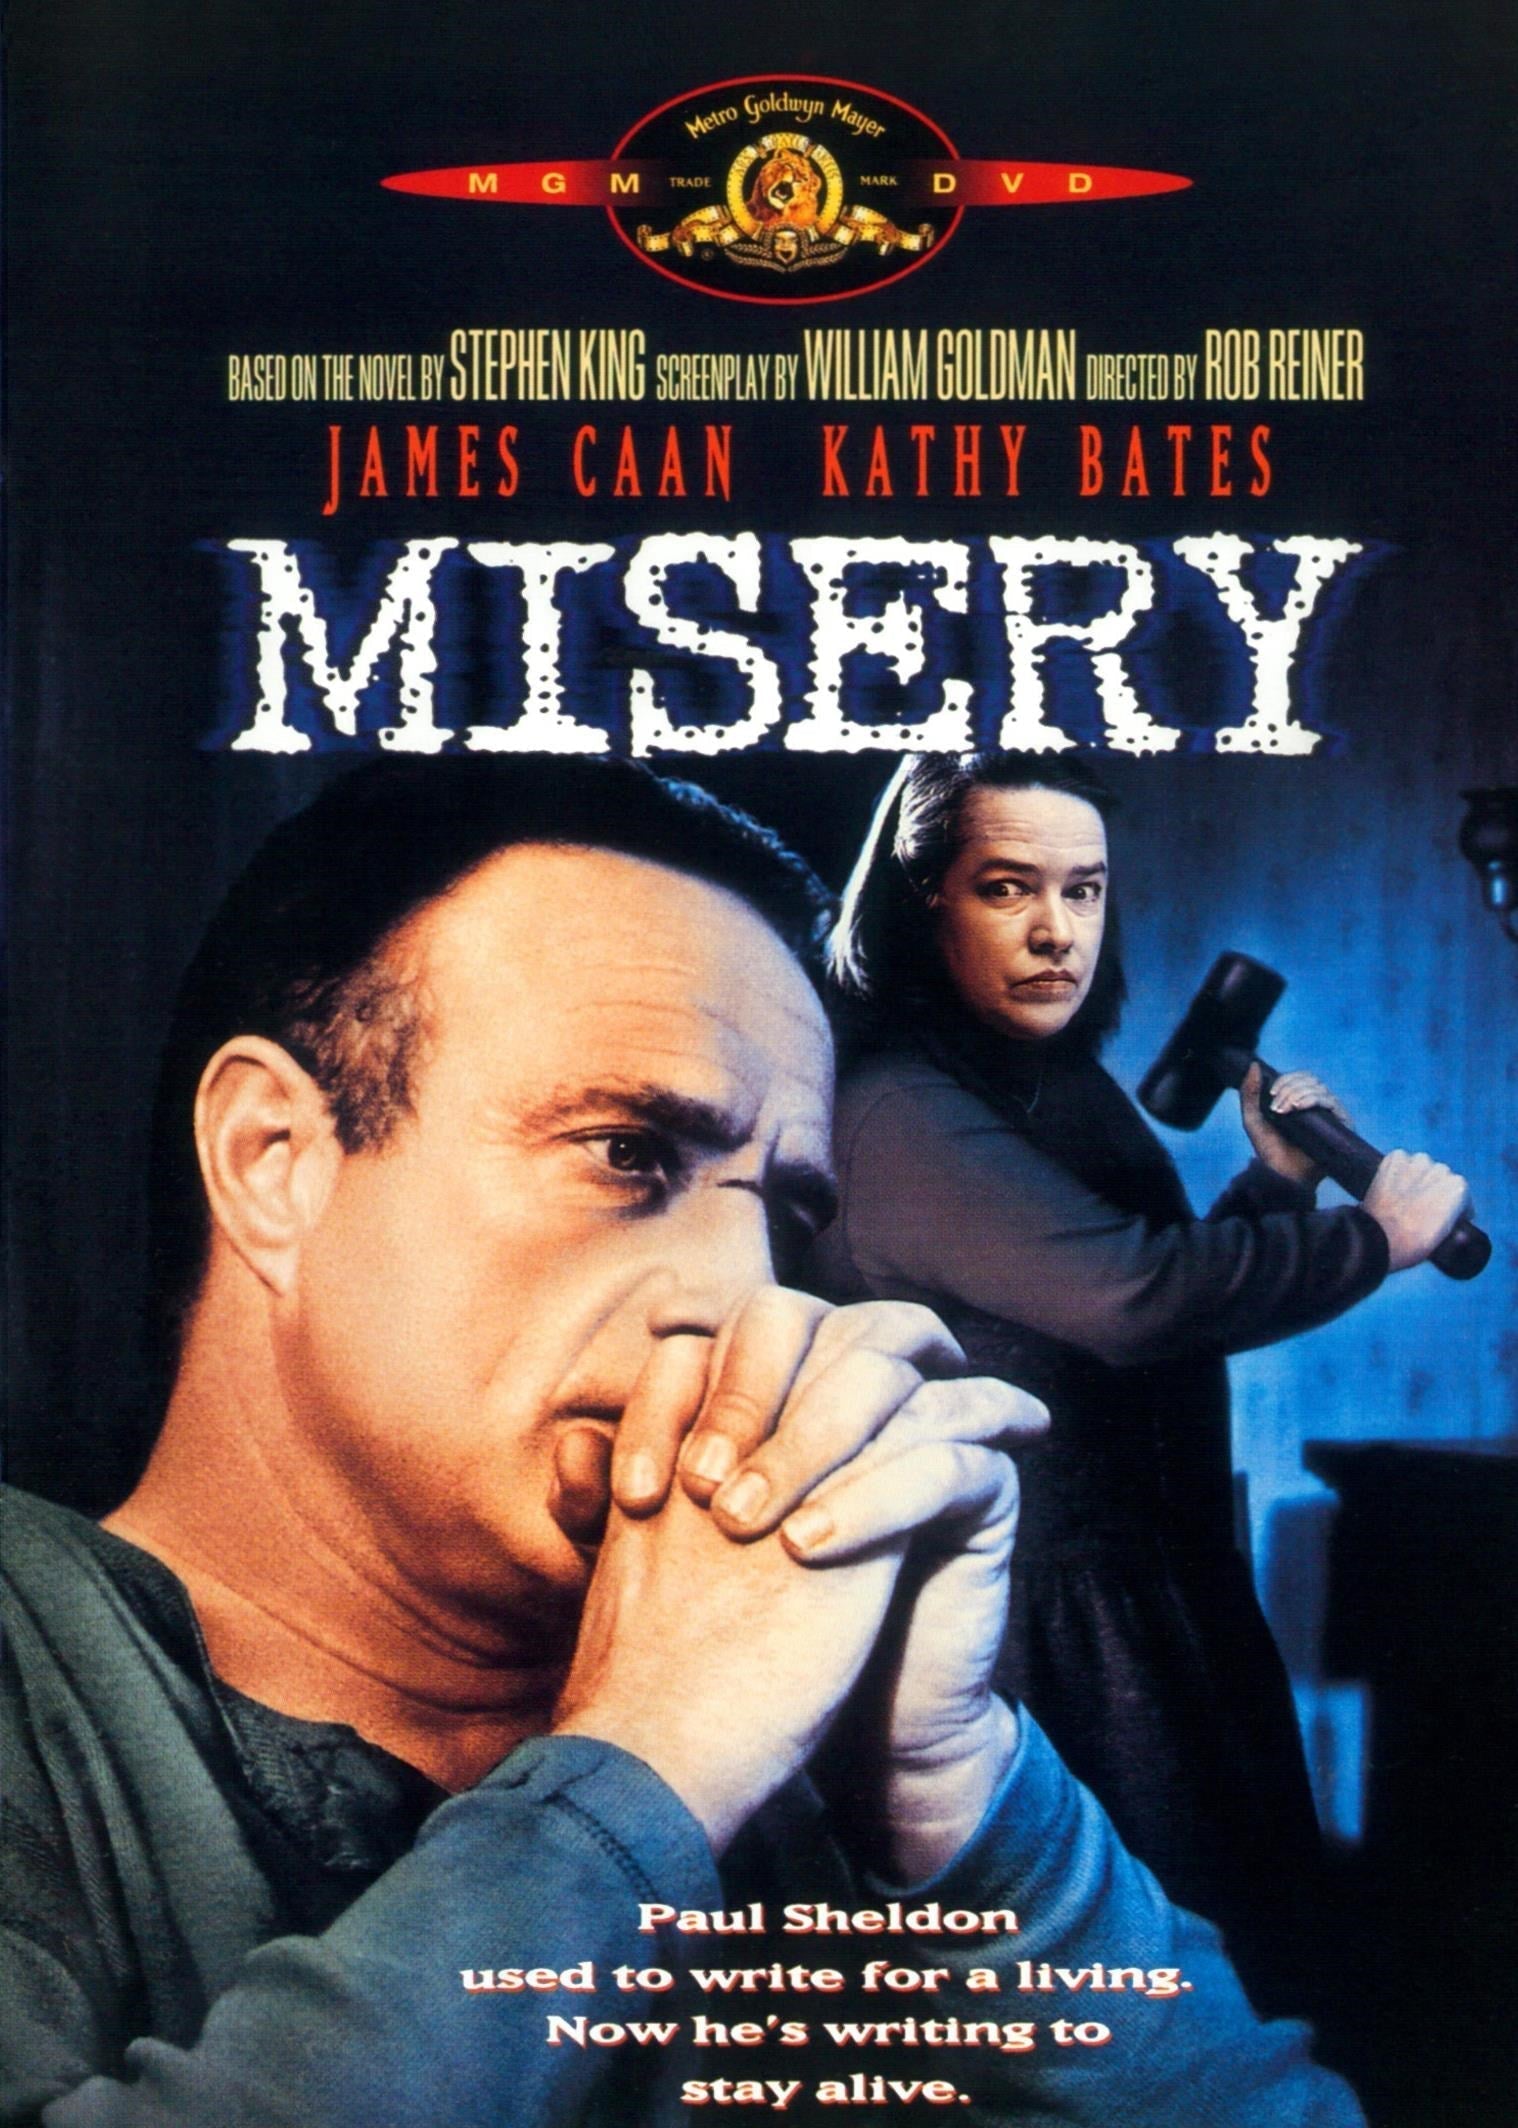 Misery rareandcollectibledvds